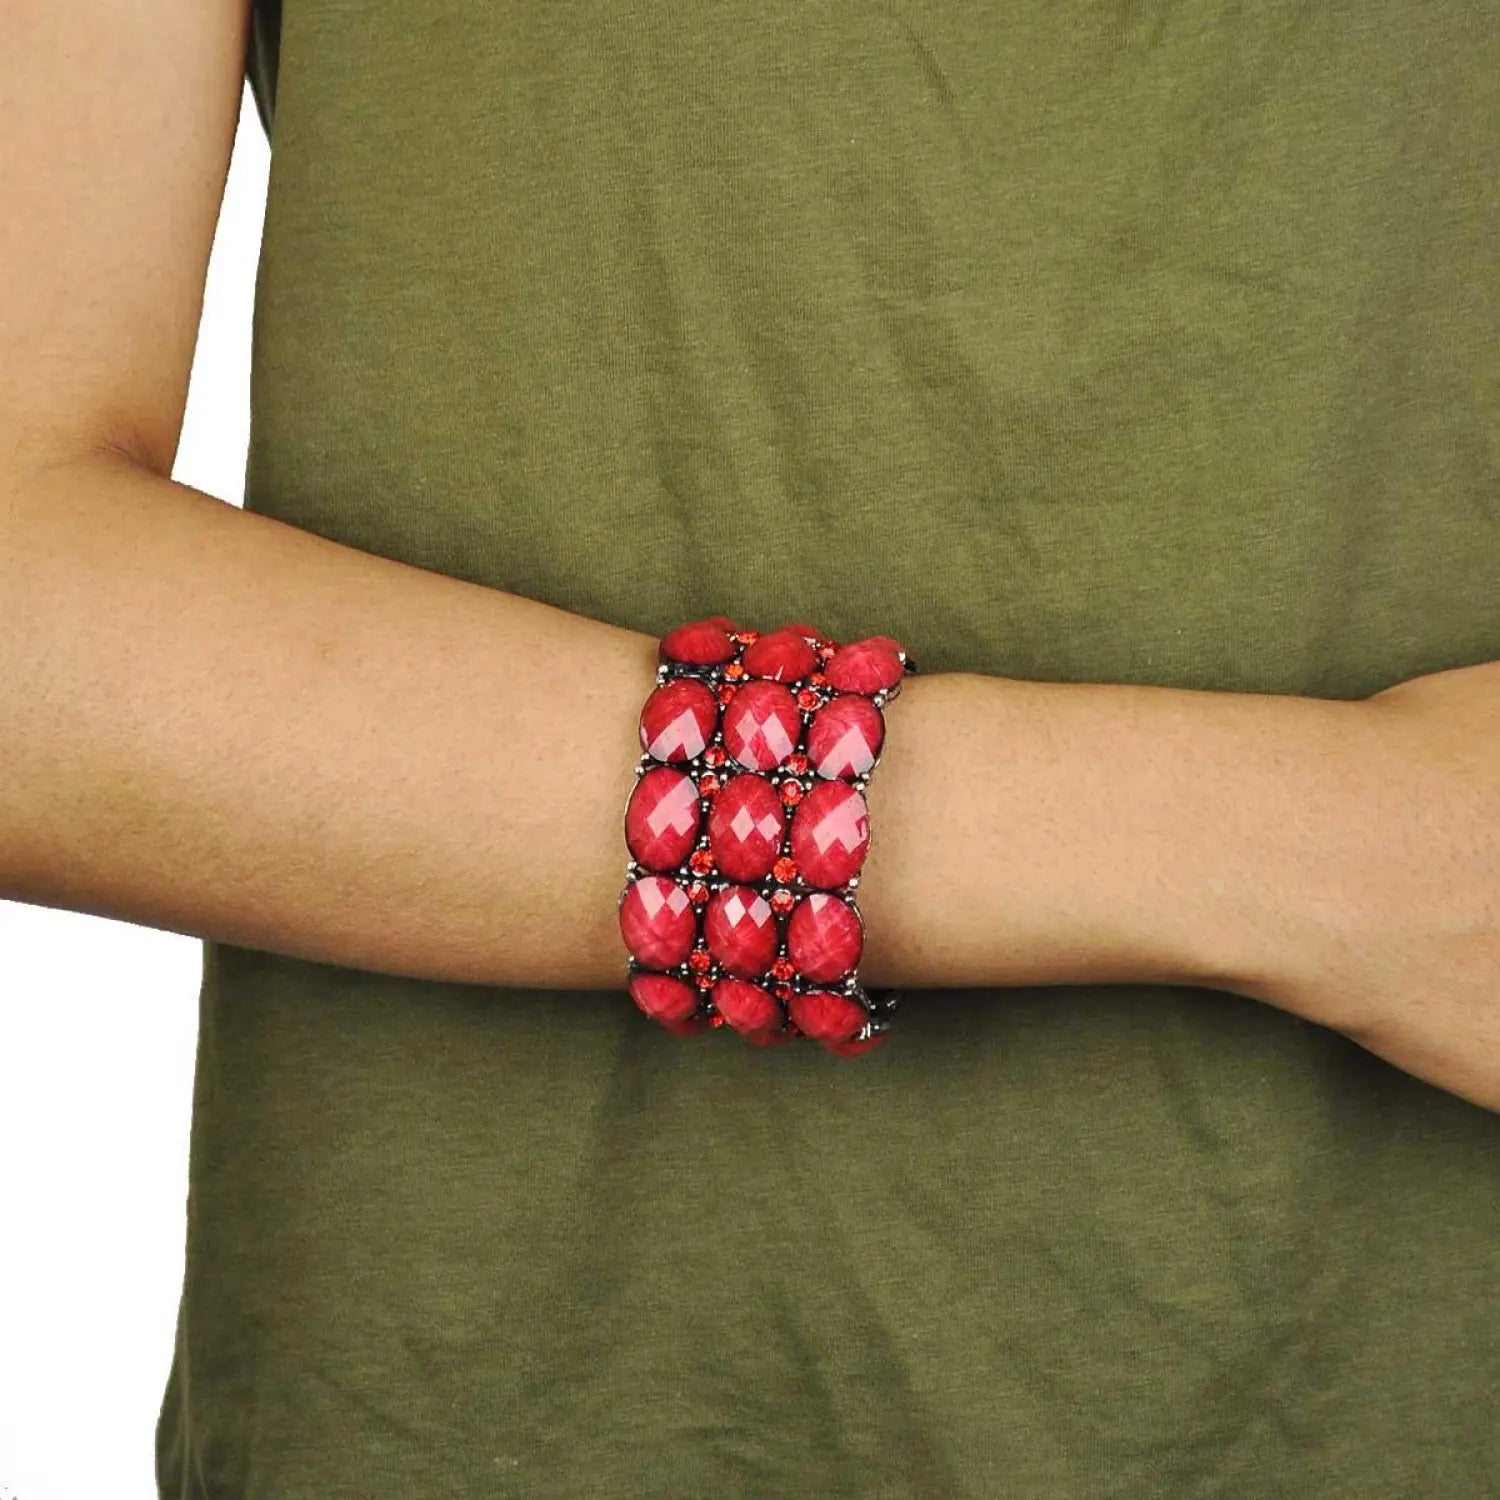 Chunky Vivid Metal Beads Bangle - Retro Bracelet Jewelry featuring a man wearing a red bracelet with black beads